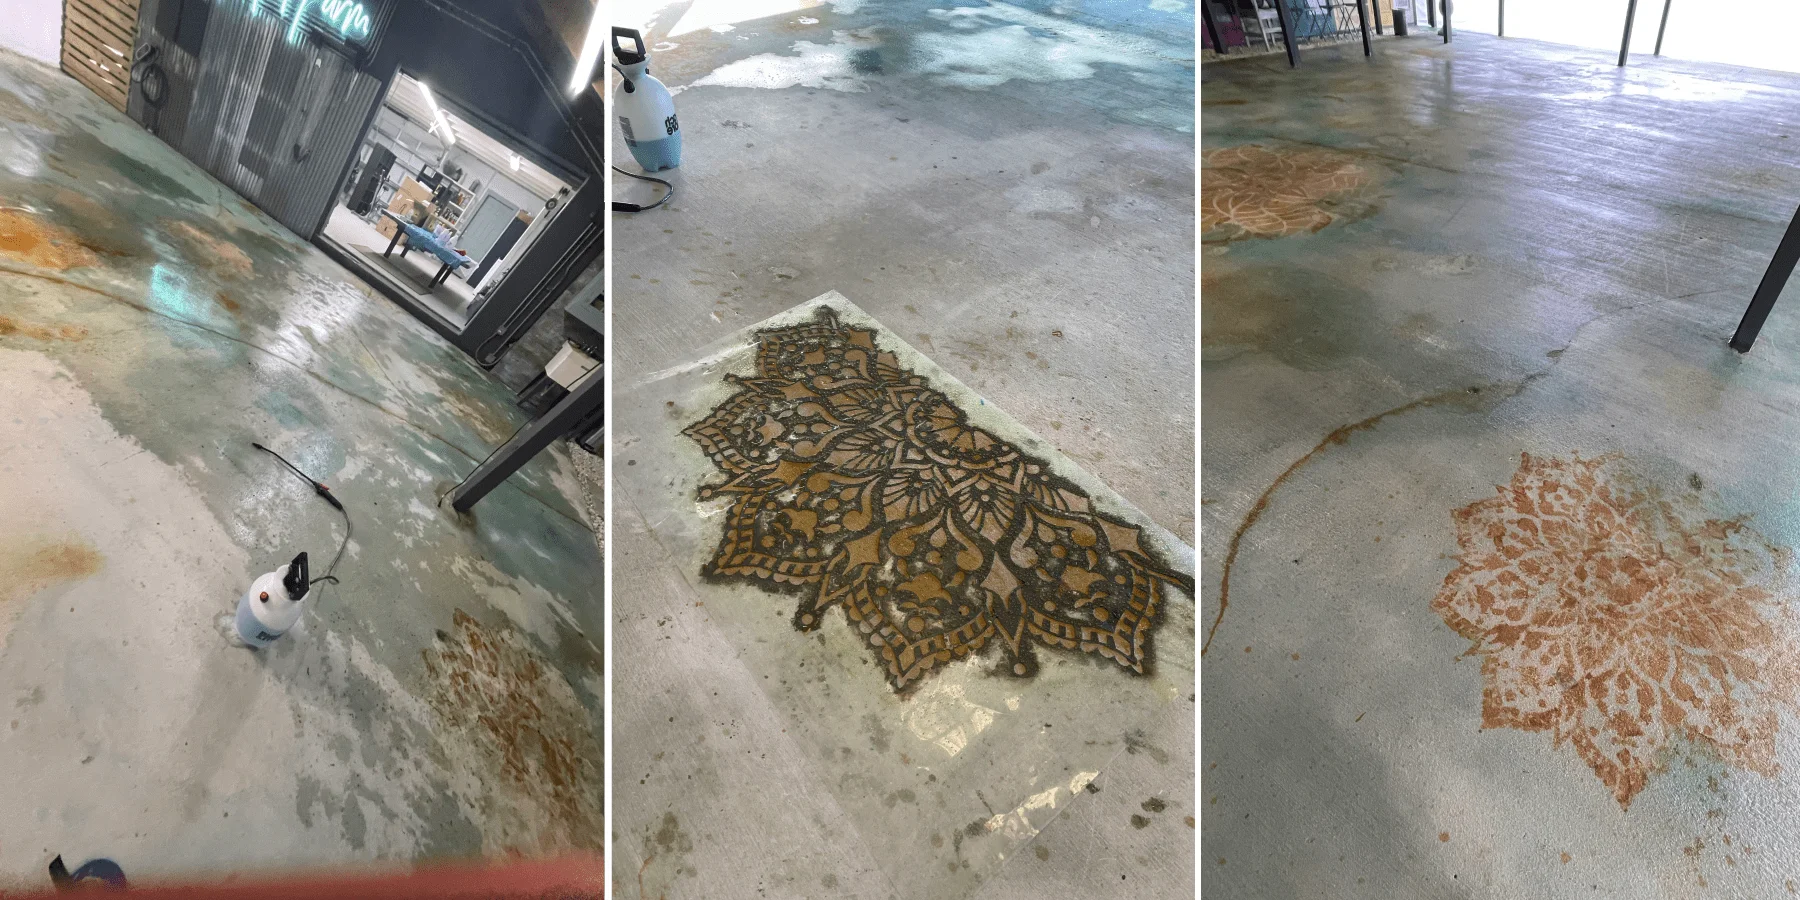 The first image shows a concrete floor being stained with azure blue, seagrass, and malayan buff. The second image focuses on a detailed floral-patterned stencil lying on the concrete floor, revealing the design being stained with acid in warm brown tones. The third image shows the result of the removed stencil, leaving a beautiful, intricate floral pattern stained on the concrete.